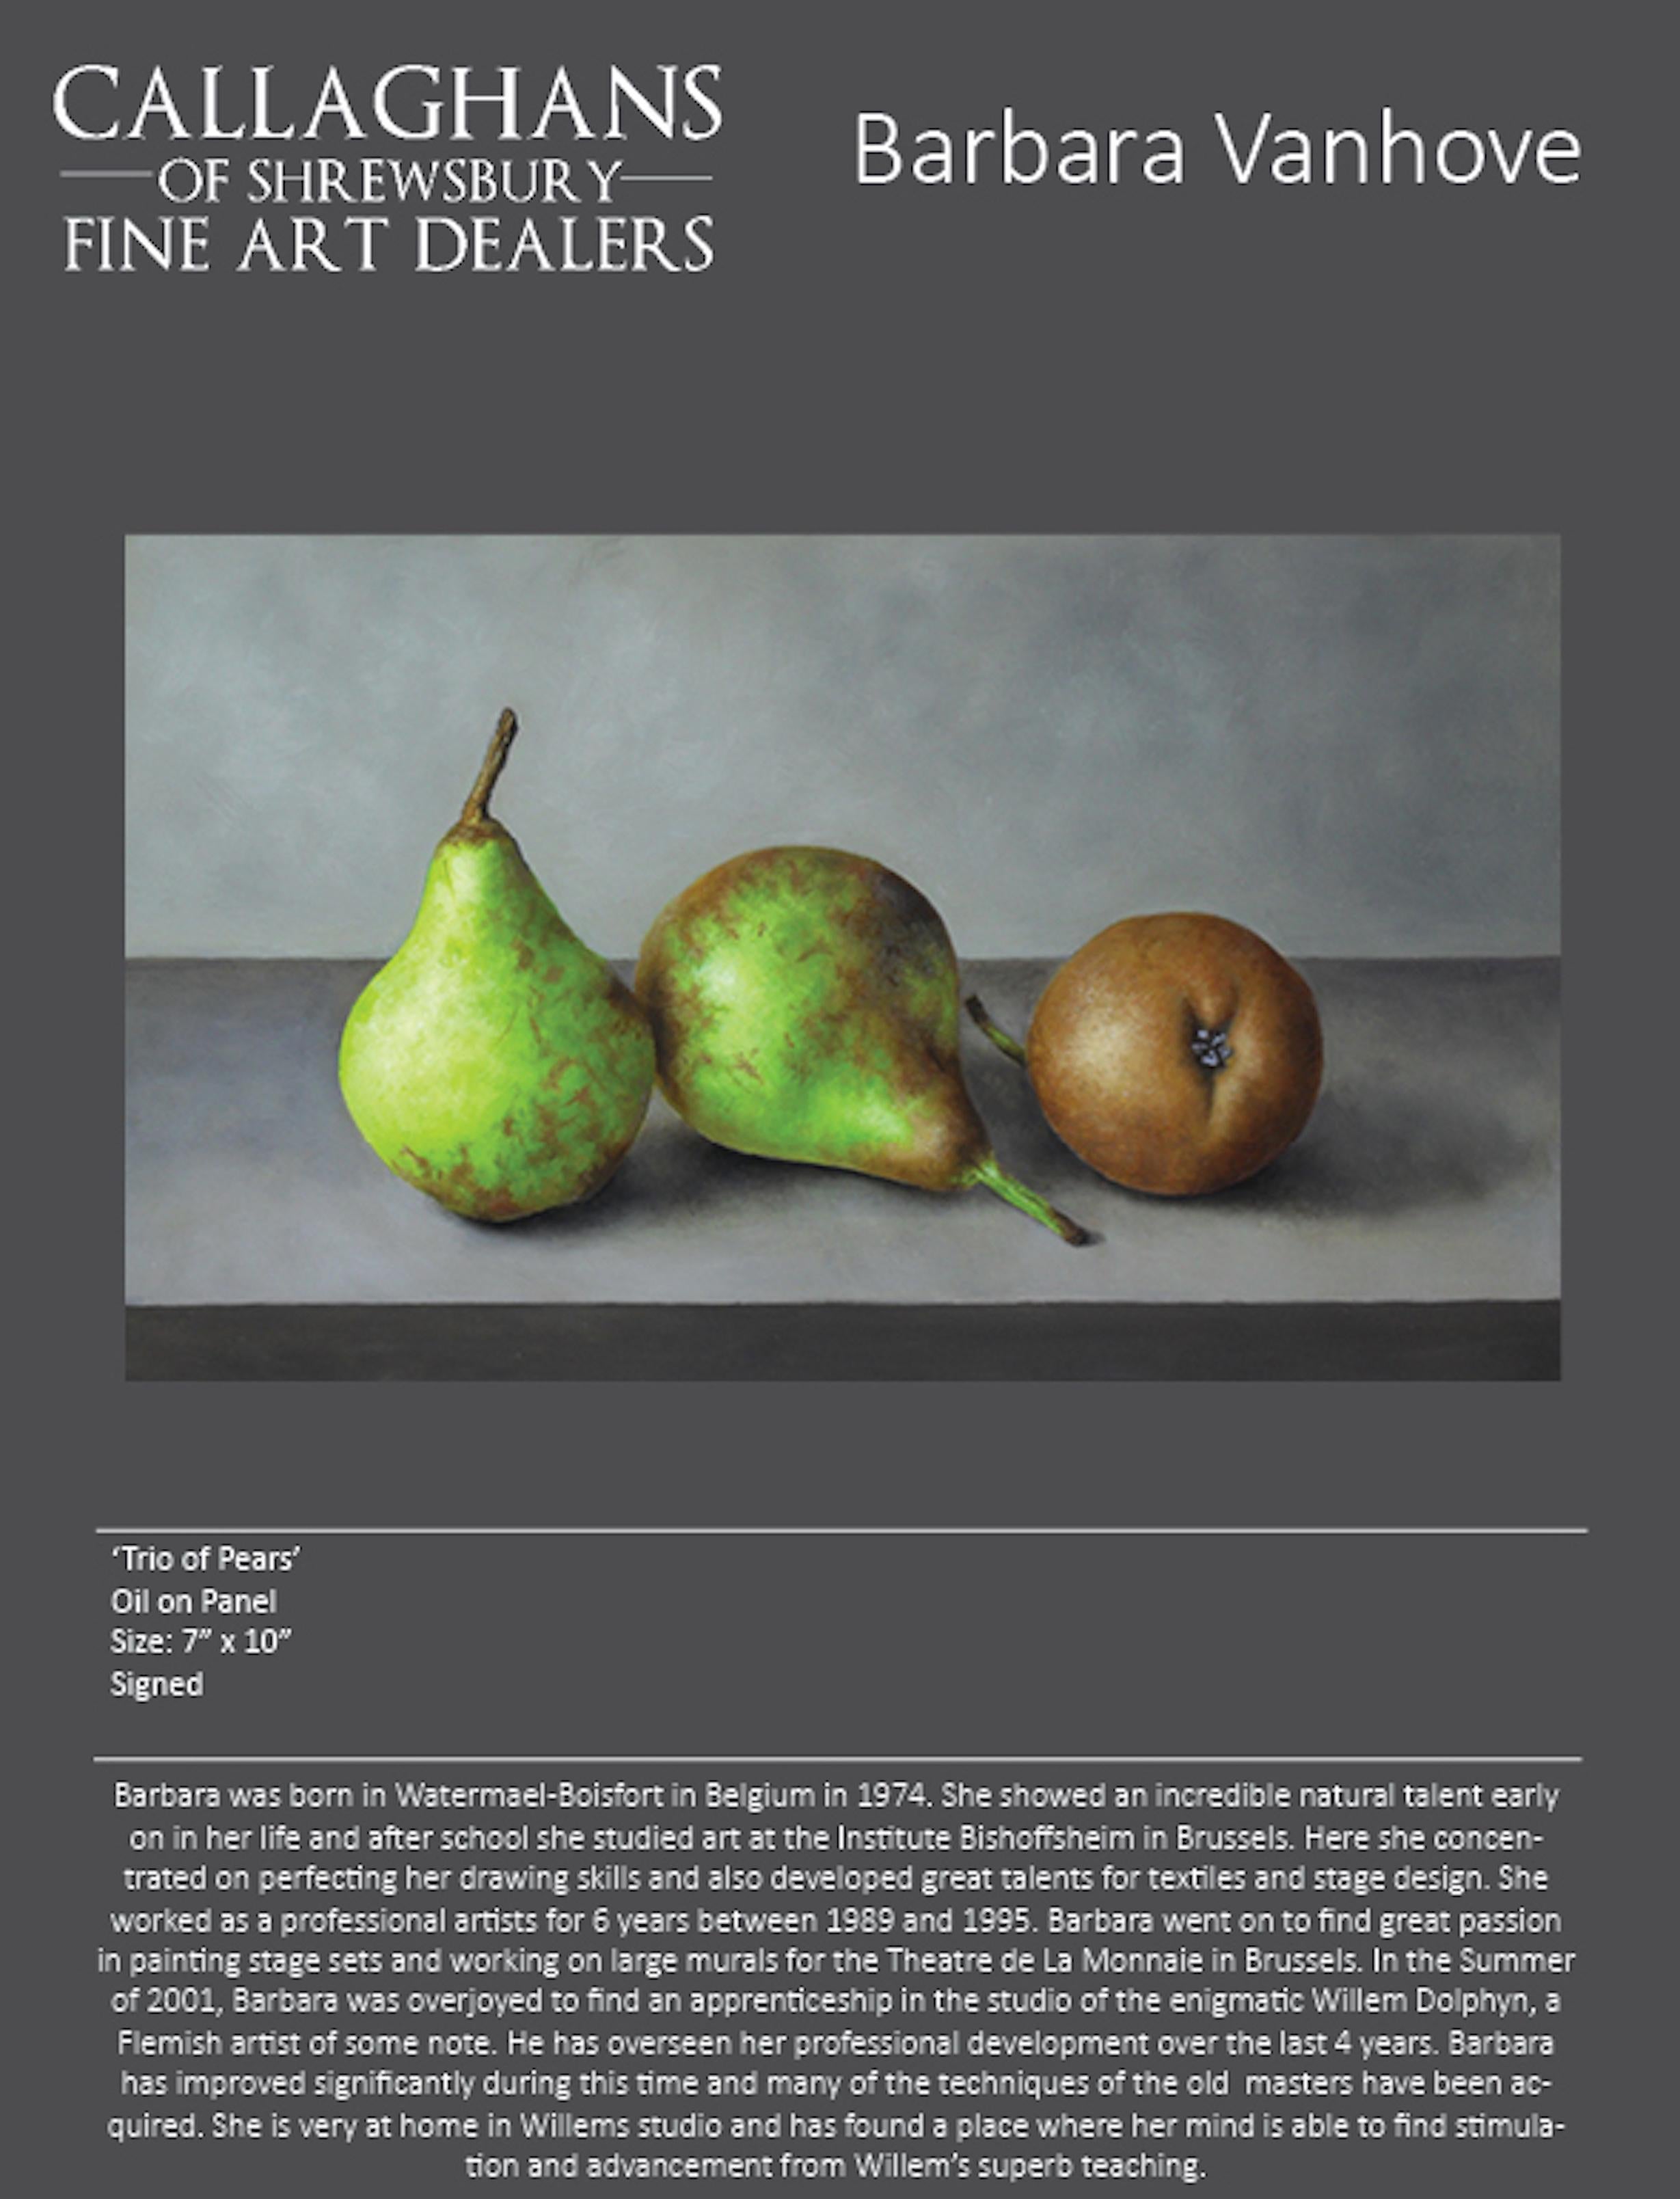 Trio of Pears is a stunning Still Life painting that would make a welcome addition to anyones collection. 

The soft green hues work beautifully with the soft grey background. The detail in the pears are exquisite. You could almost pick them up and